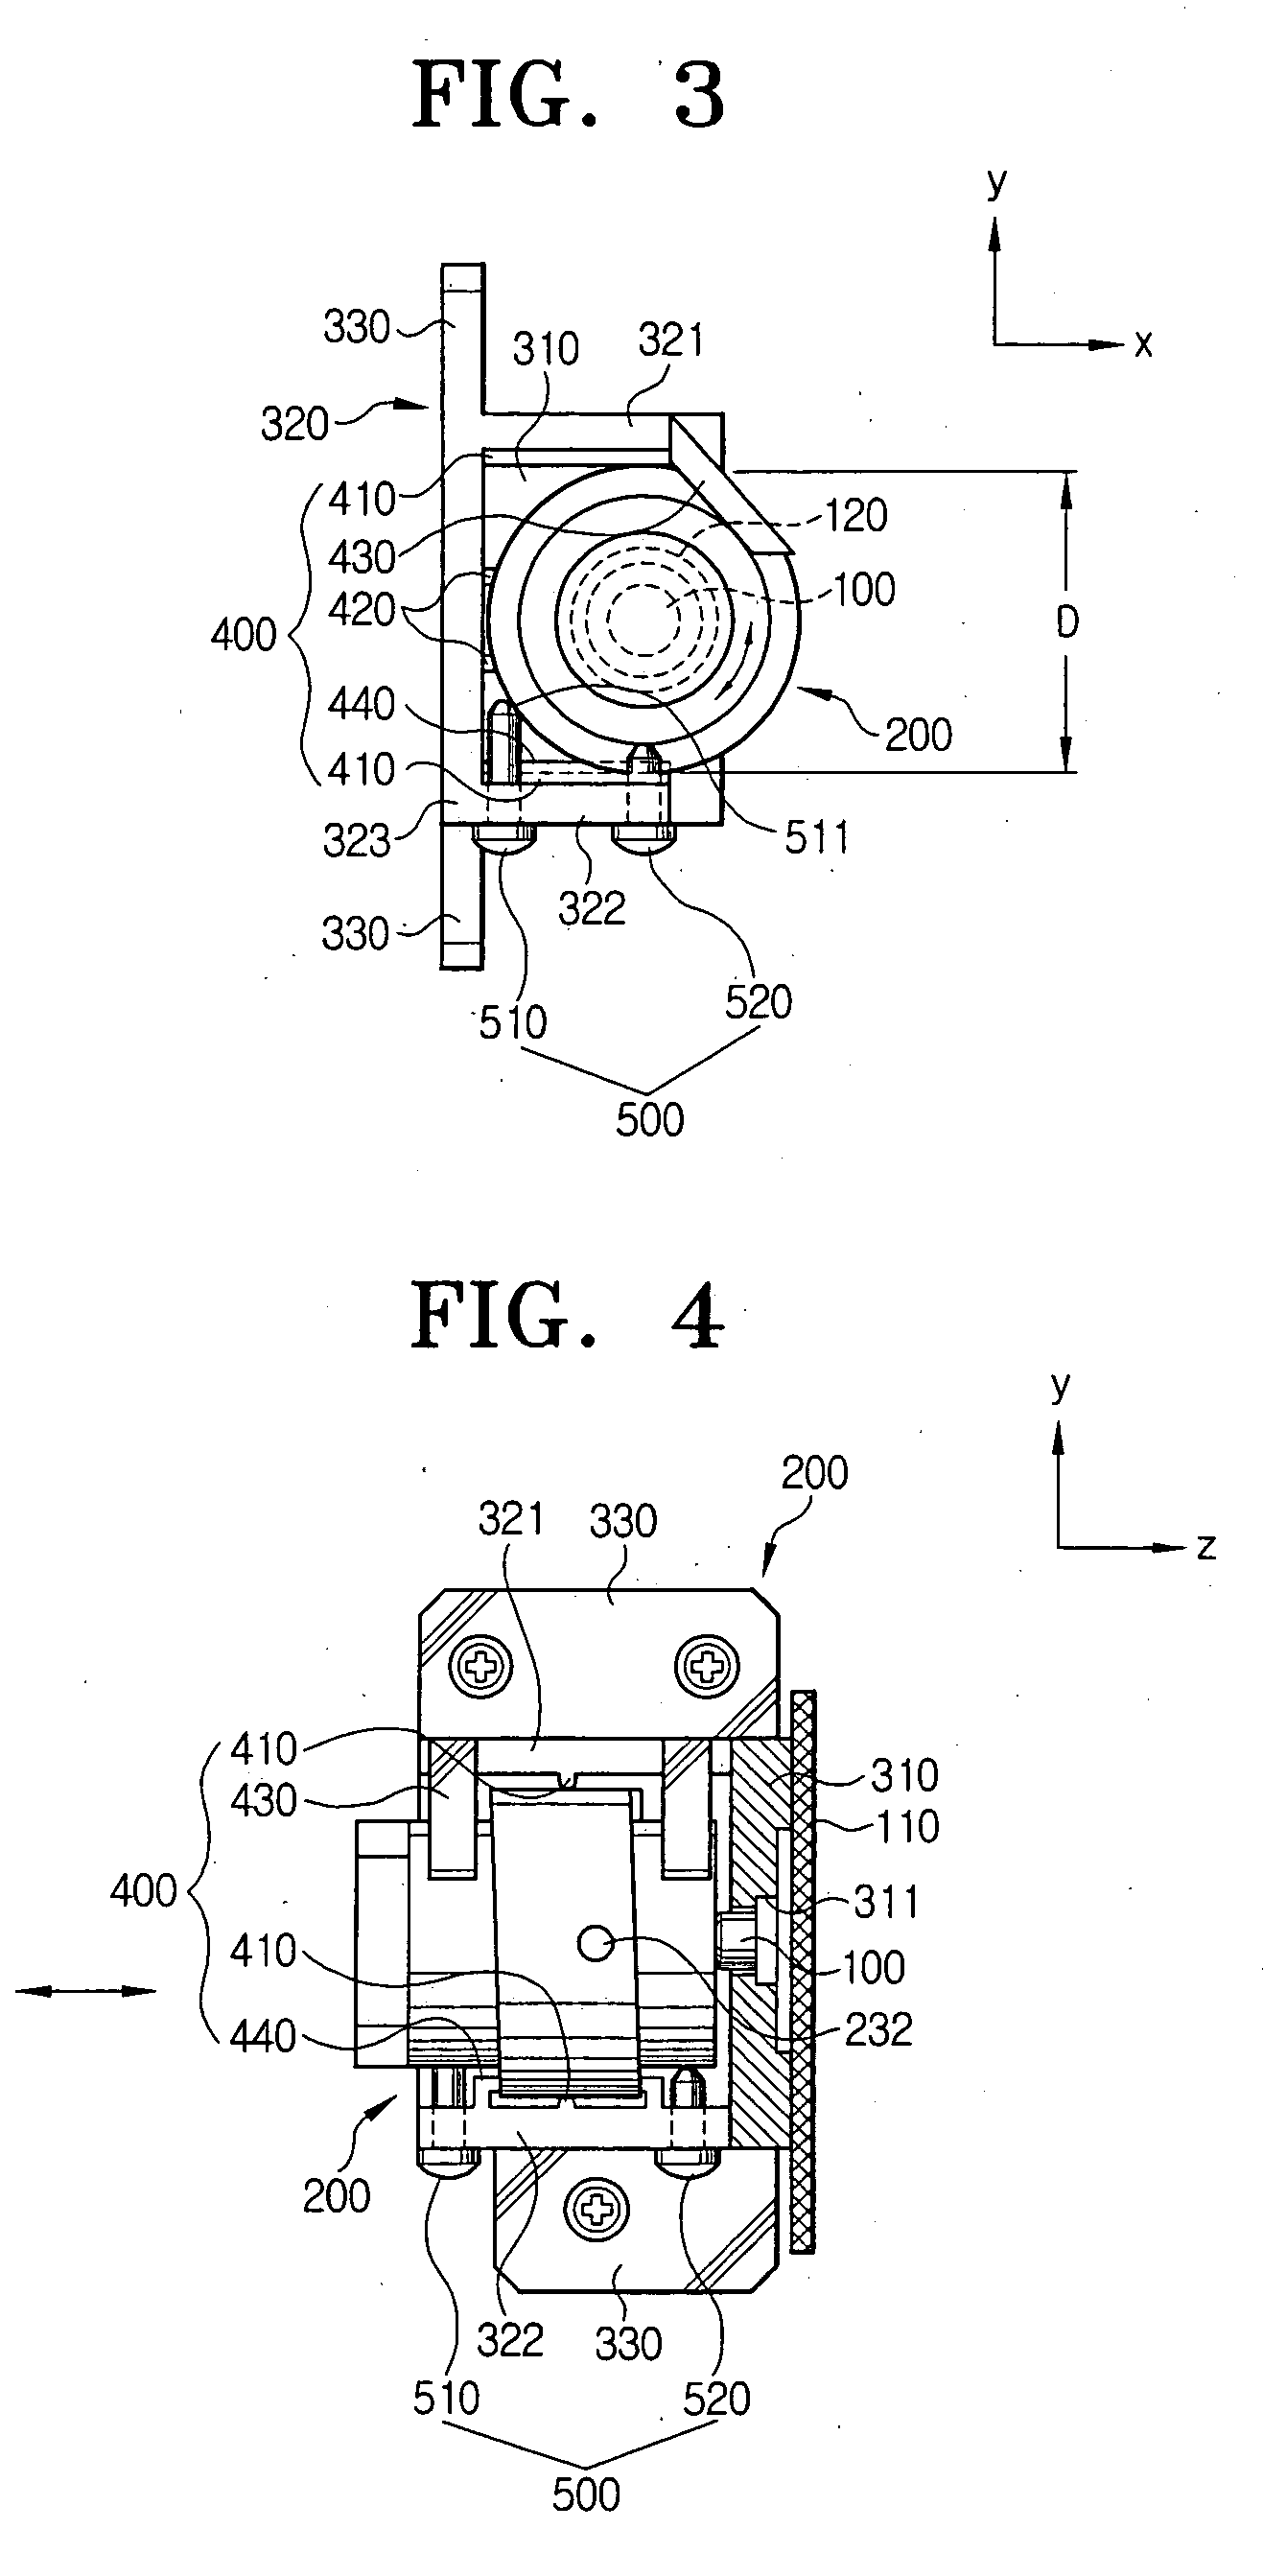 Laser beam generating apparatus for a laser scanning unit